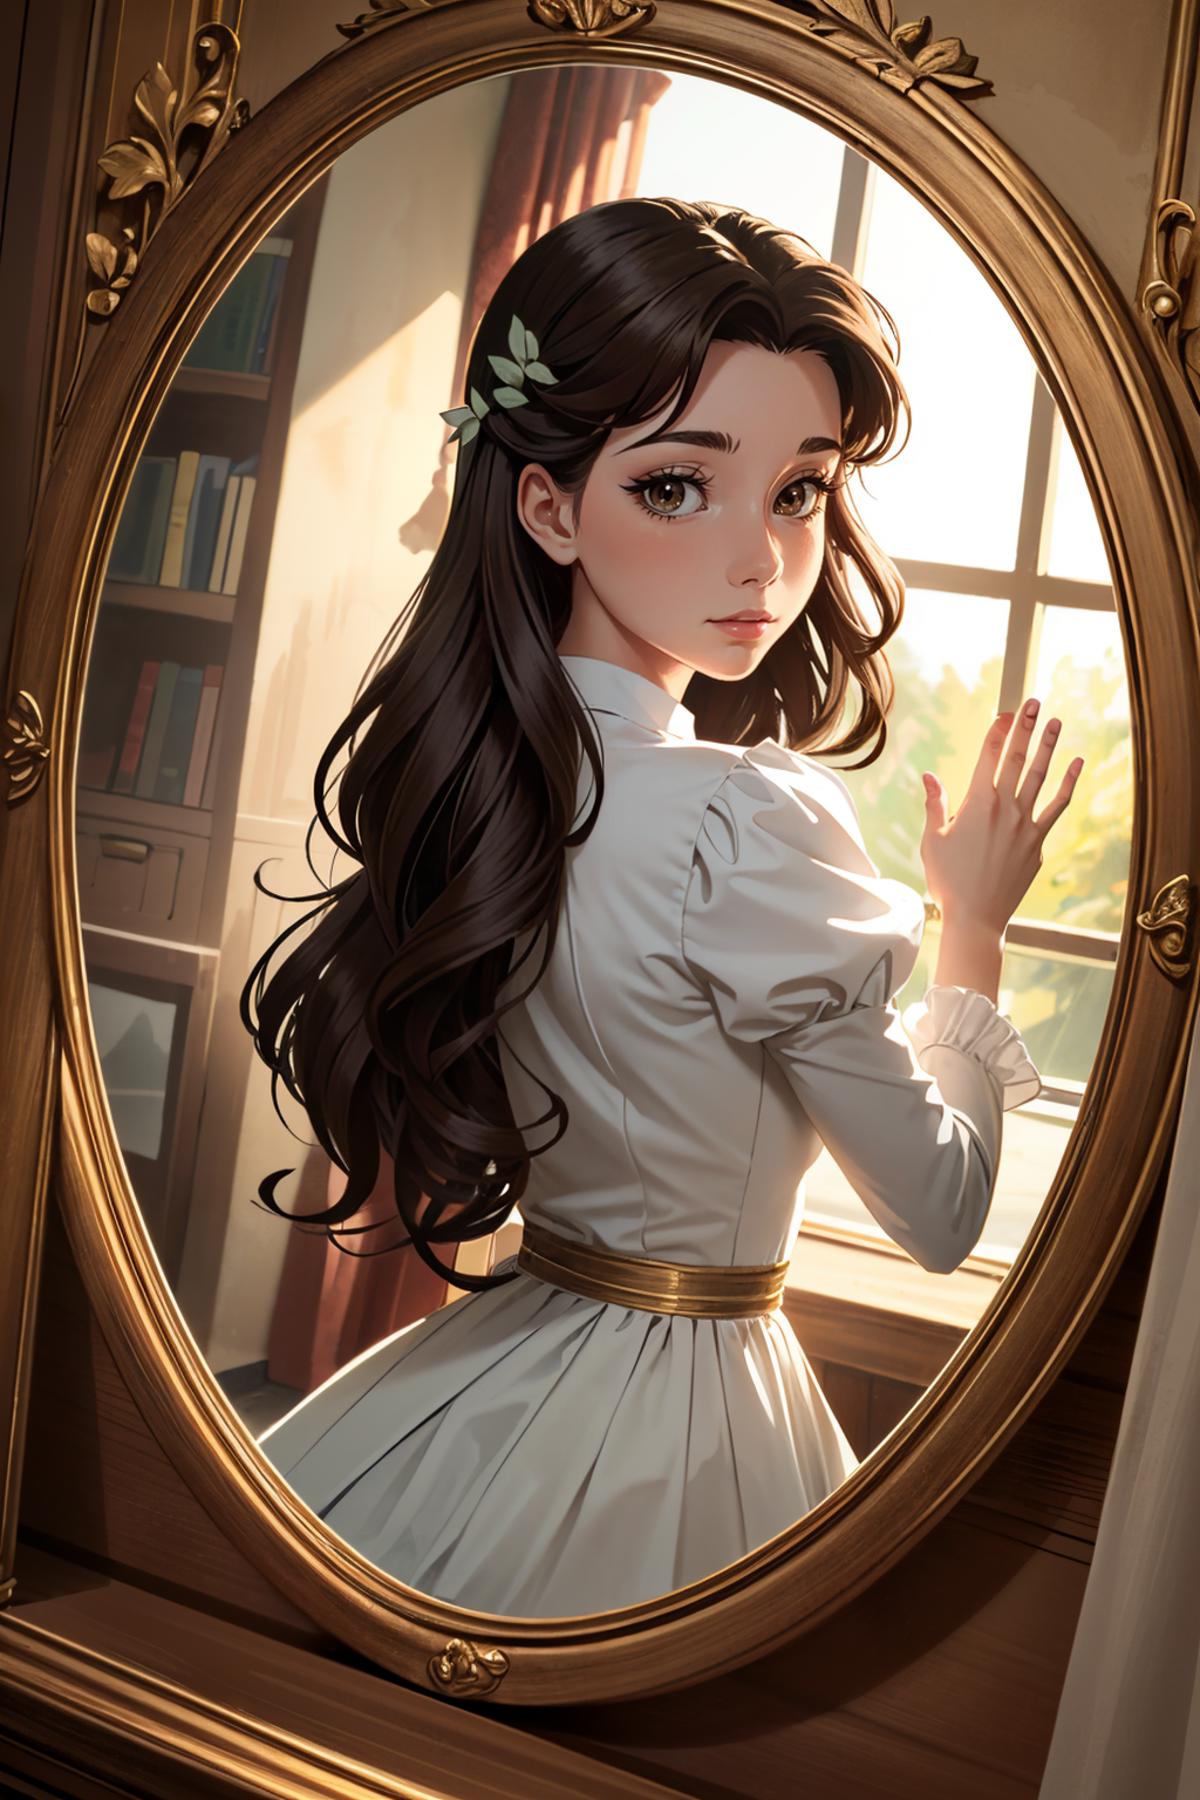 Belle from Beauty and the Beast image by BloodRedKittie